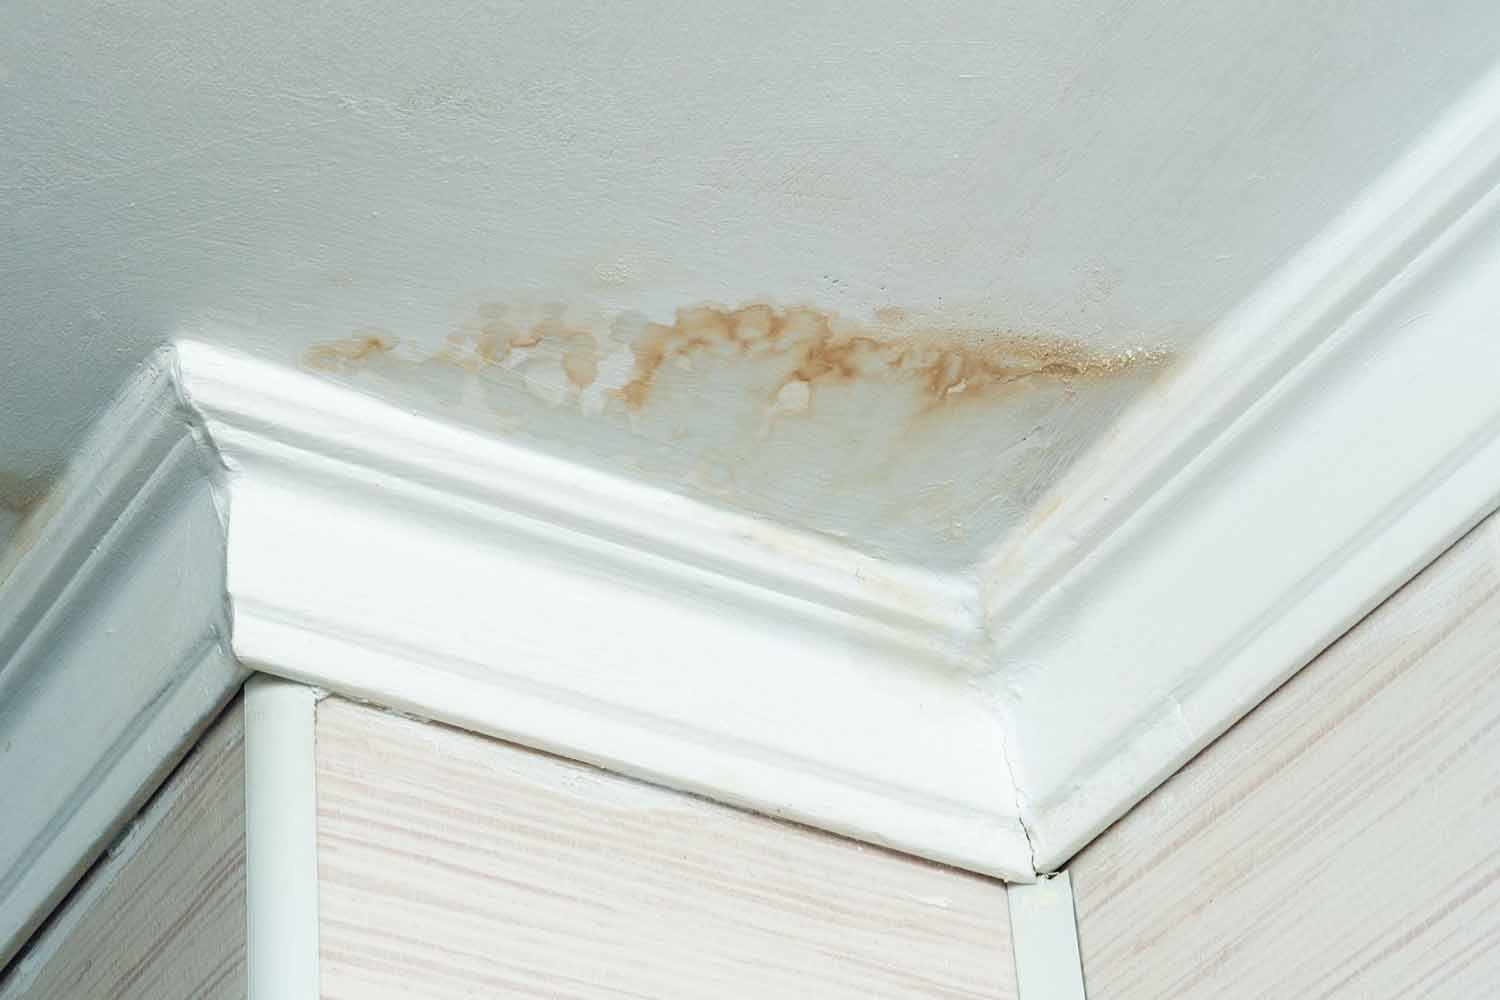 Brown water stain on ceiling caused by a damaged roof